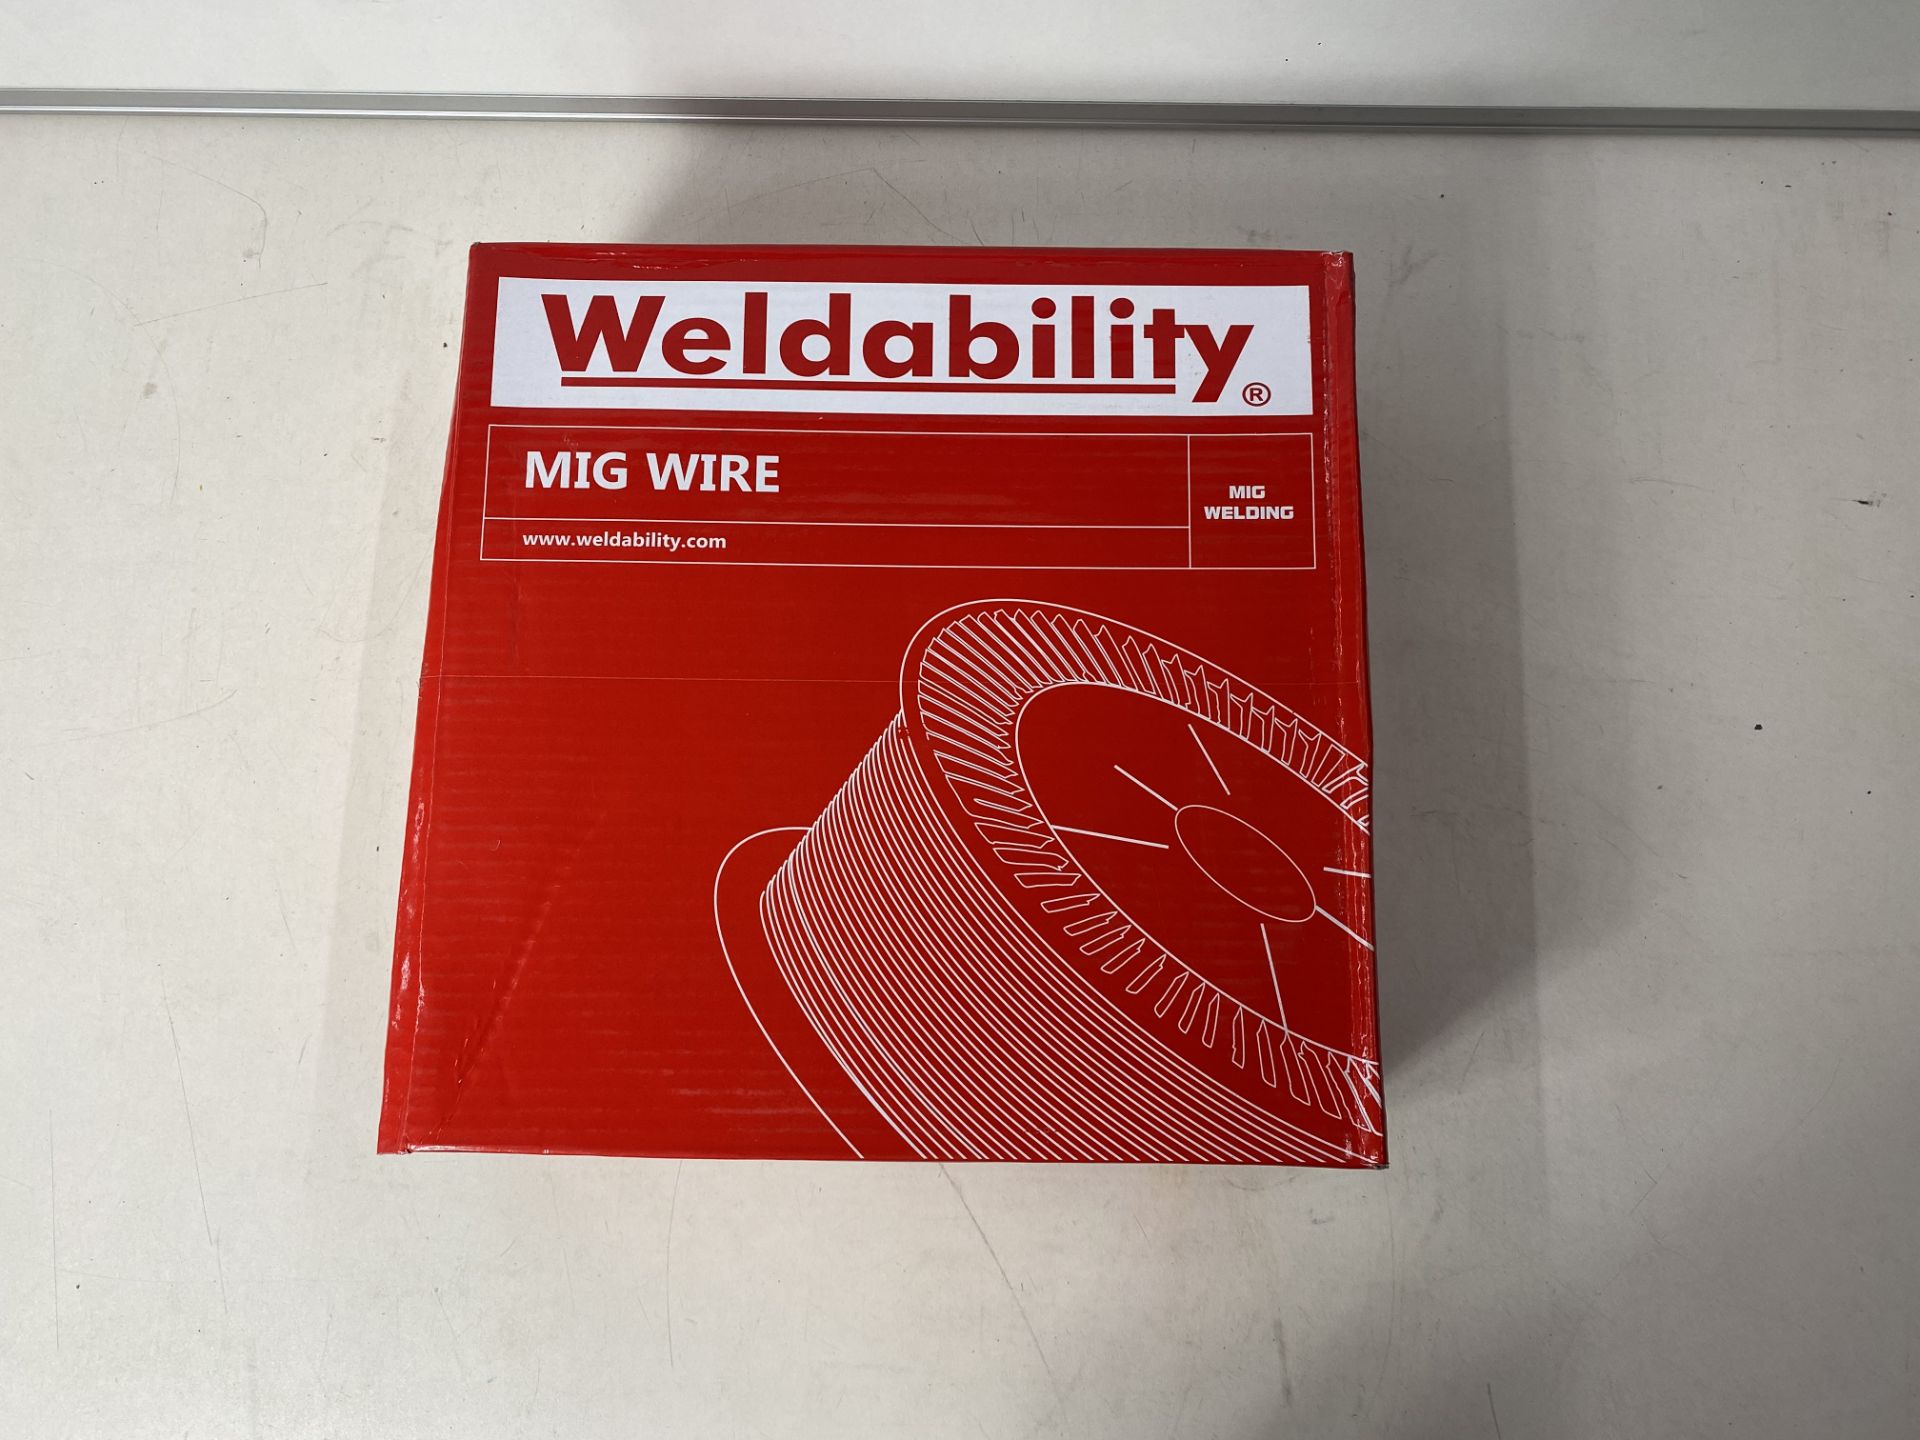 2 x Weldability Mig Wire | VZ180815LW | 0.8mm - Image 2 of 2